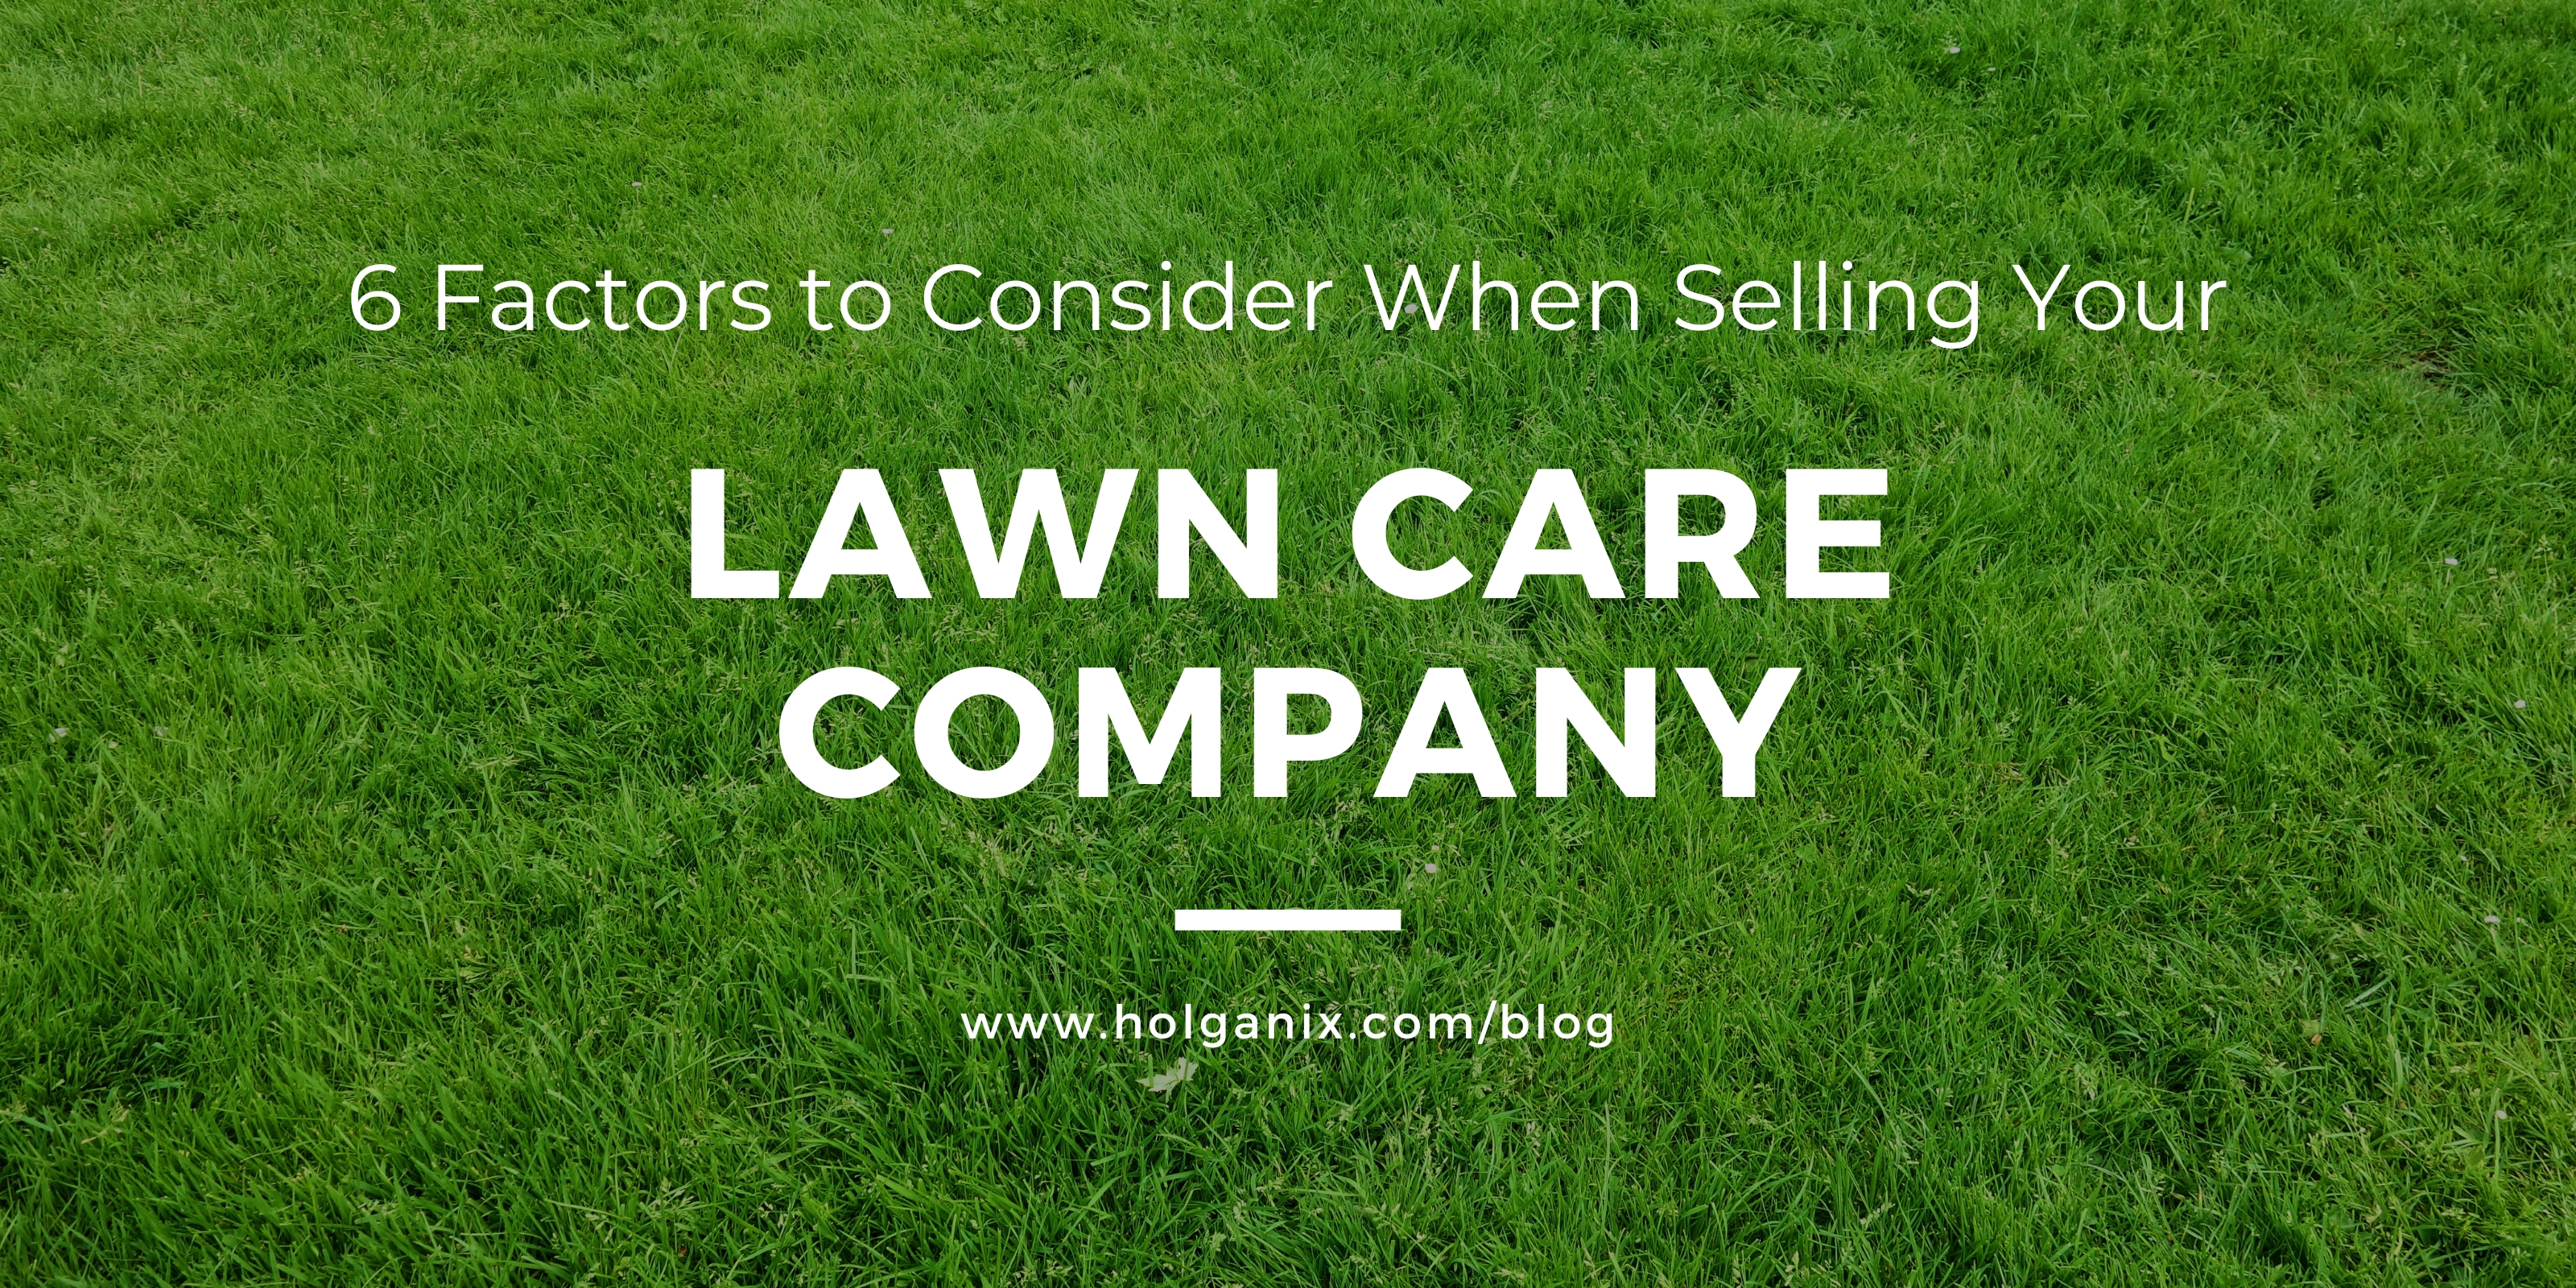 6 Factors To Consider When Selling Your Lawn Care Company